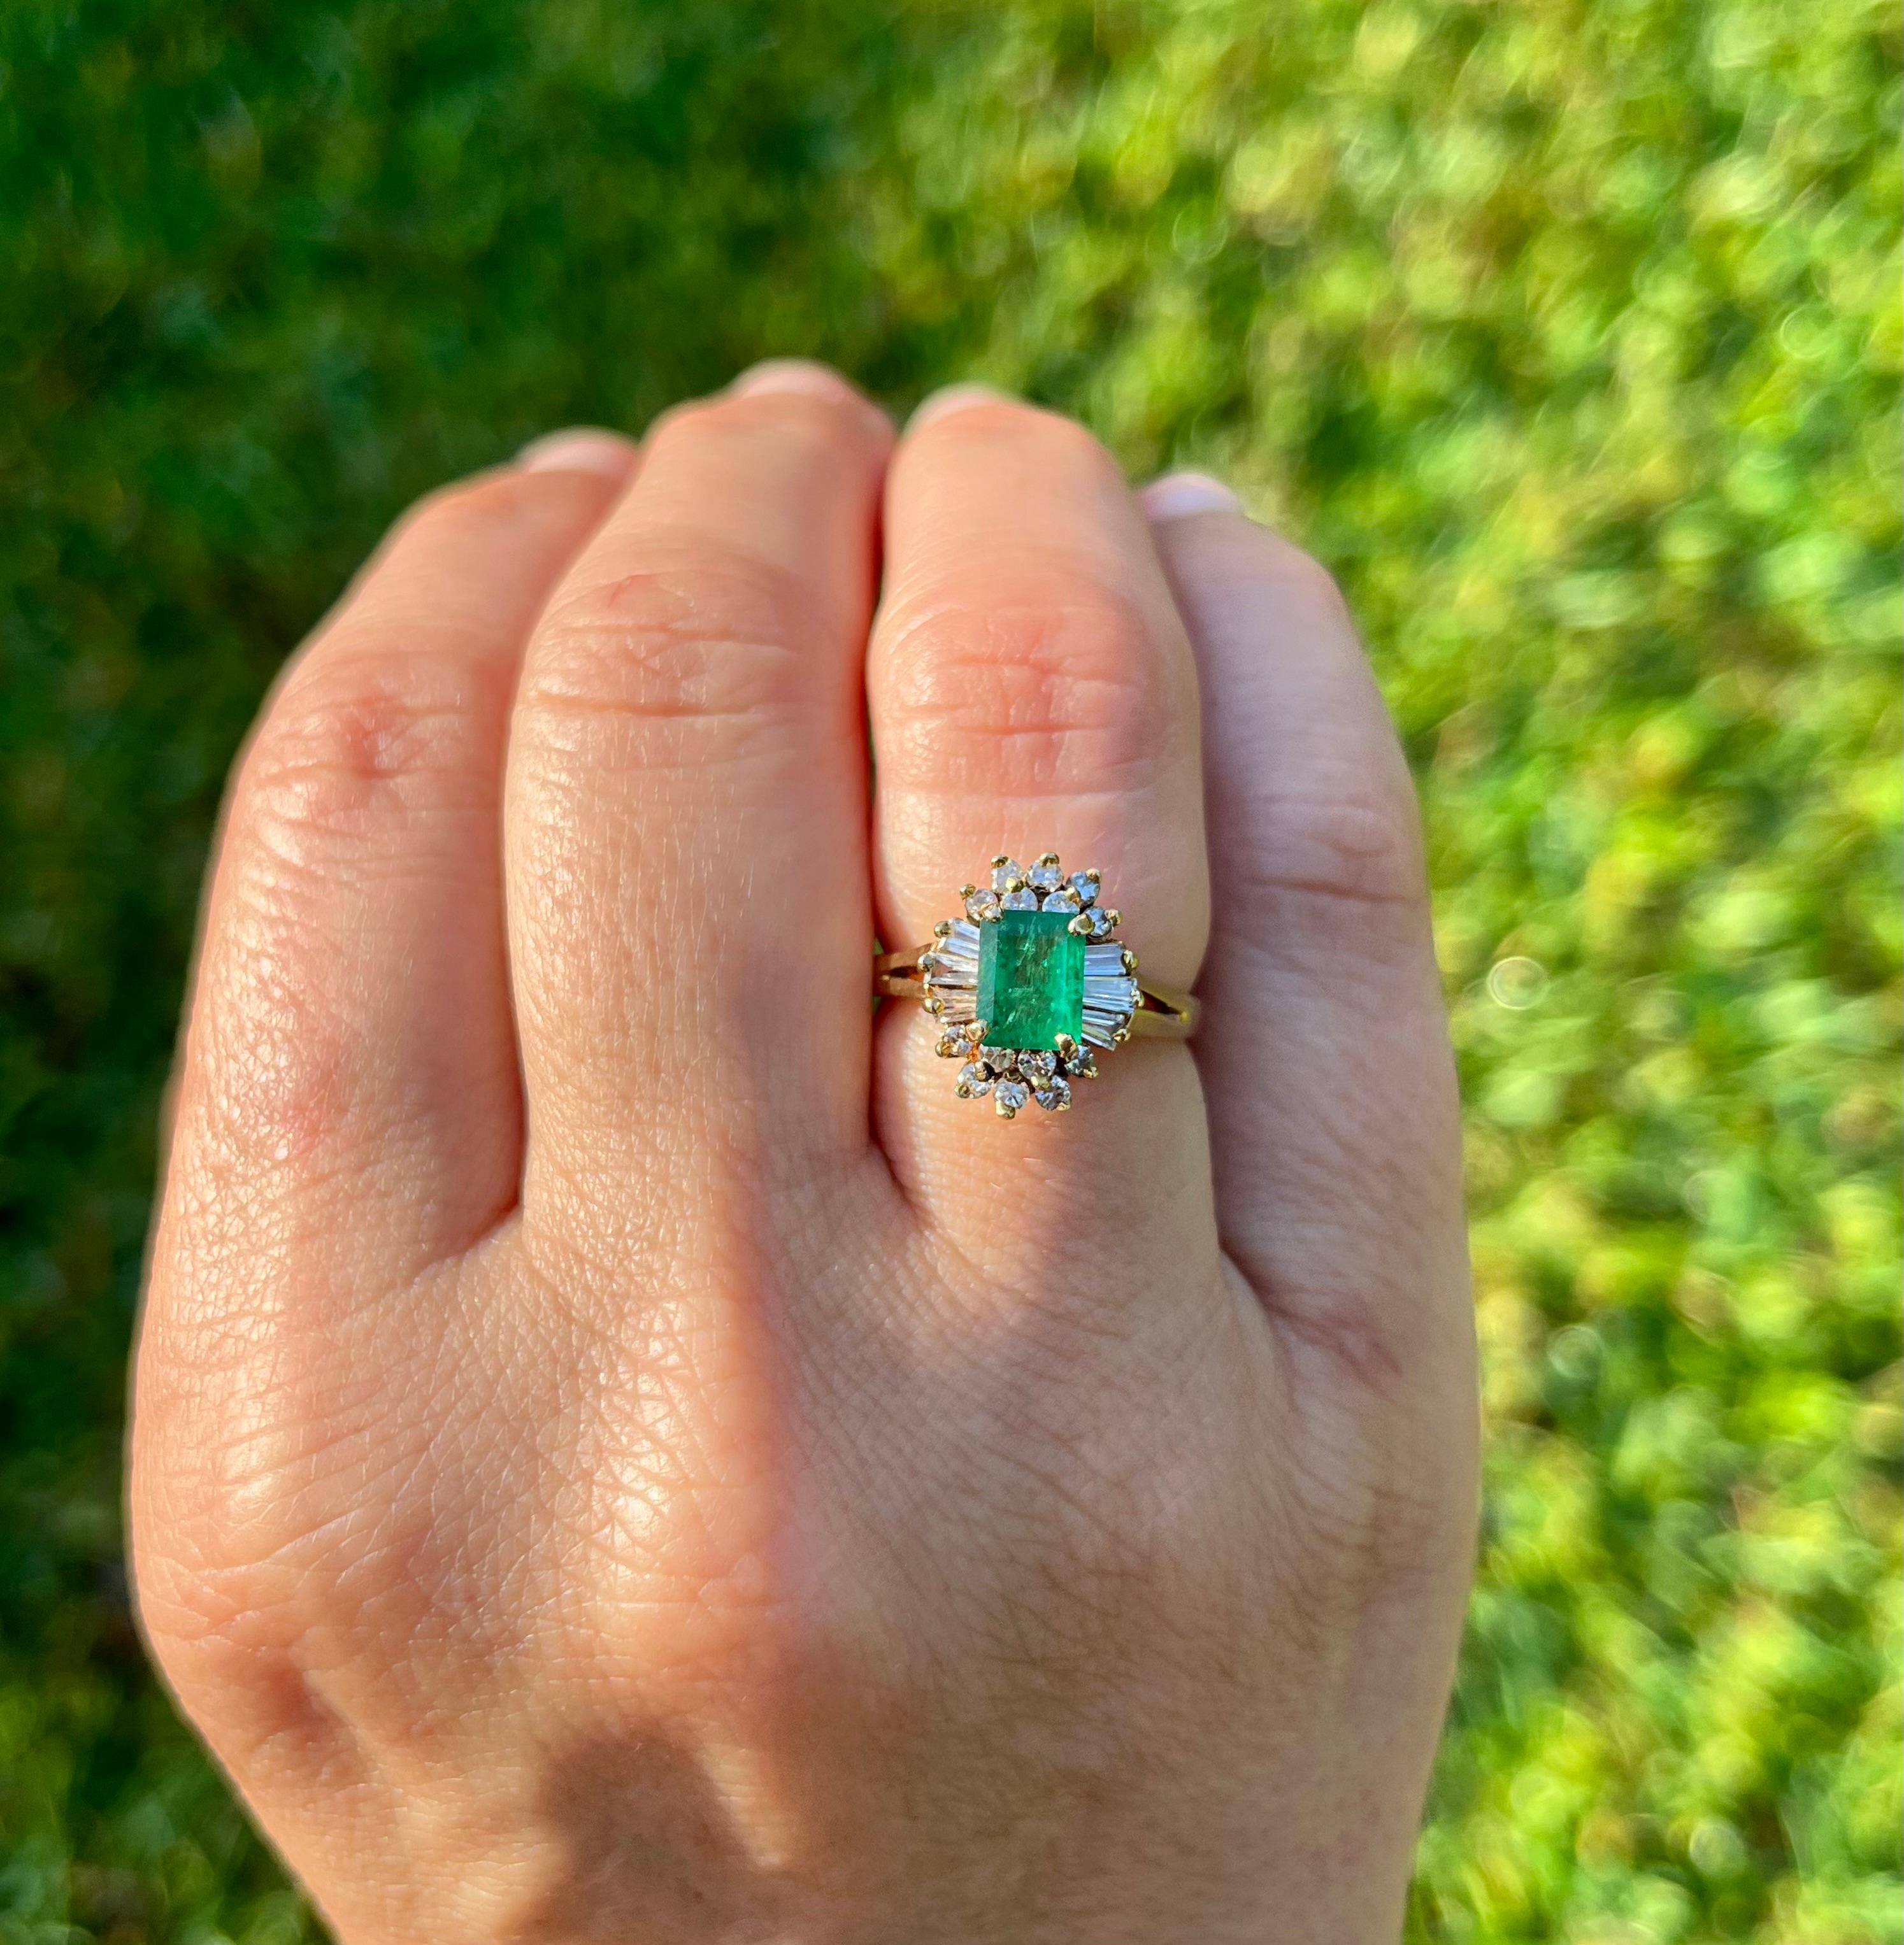 Vintage natural Emerald and natural diamond ring in 14k solid yellow gold. This vibrant Emerald bears excellent color and luster. It's well contrasted by a round and baguette-cut diamond halo. 

Certificate of appraisal included upon request.

Ring